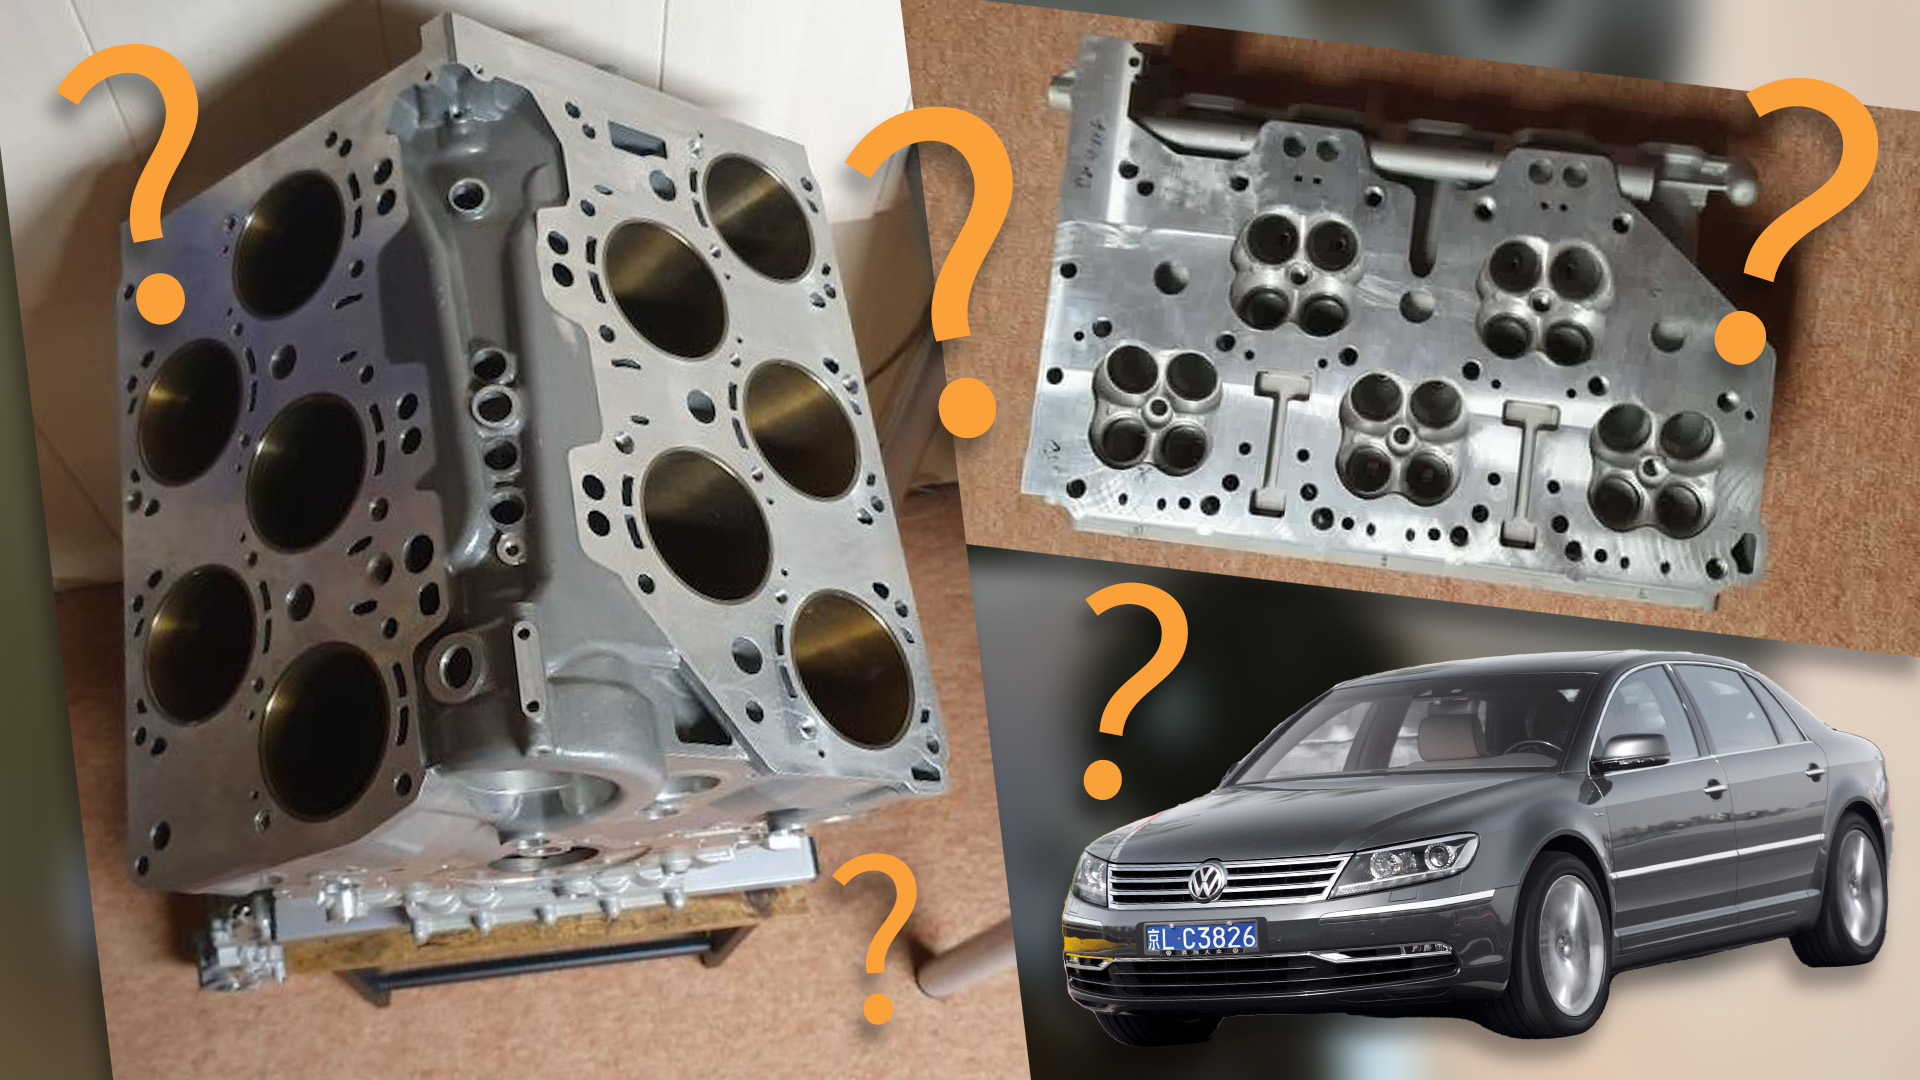 Photos of Mysterious VW W10 Engine Prototype Pop Up on Facebook